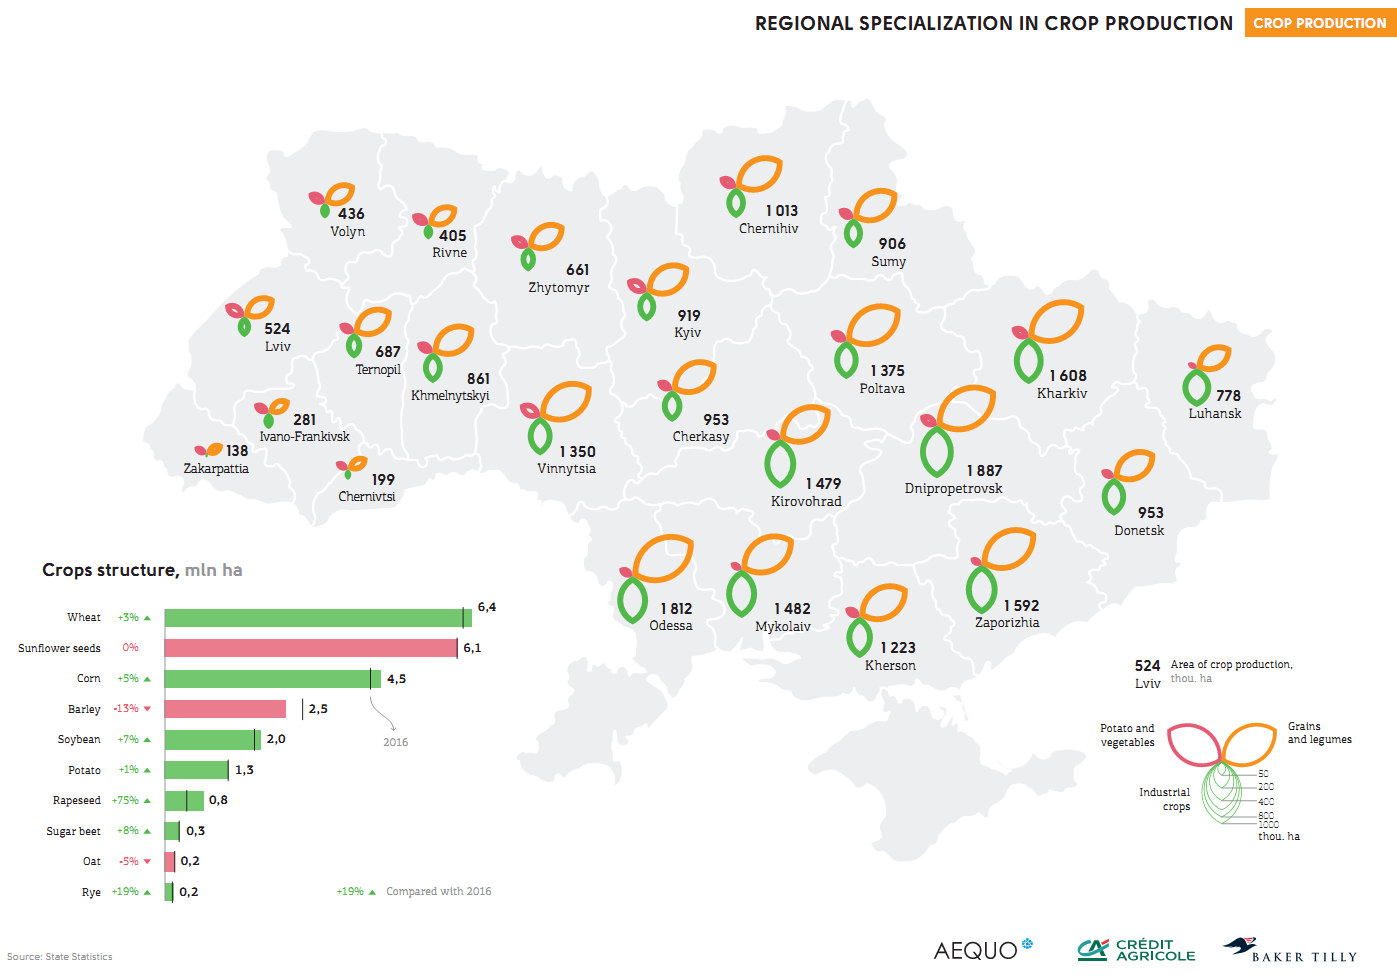 Crop production in Ukraine (click for full resolution)